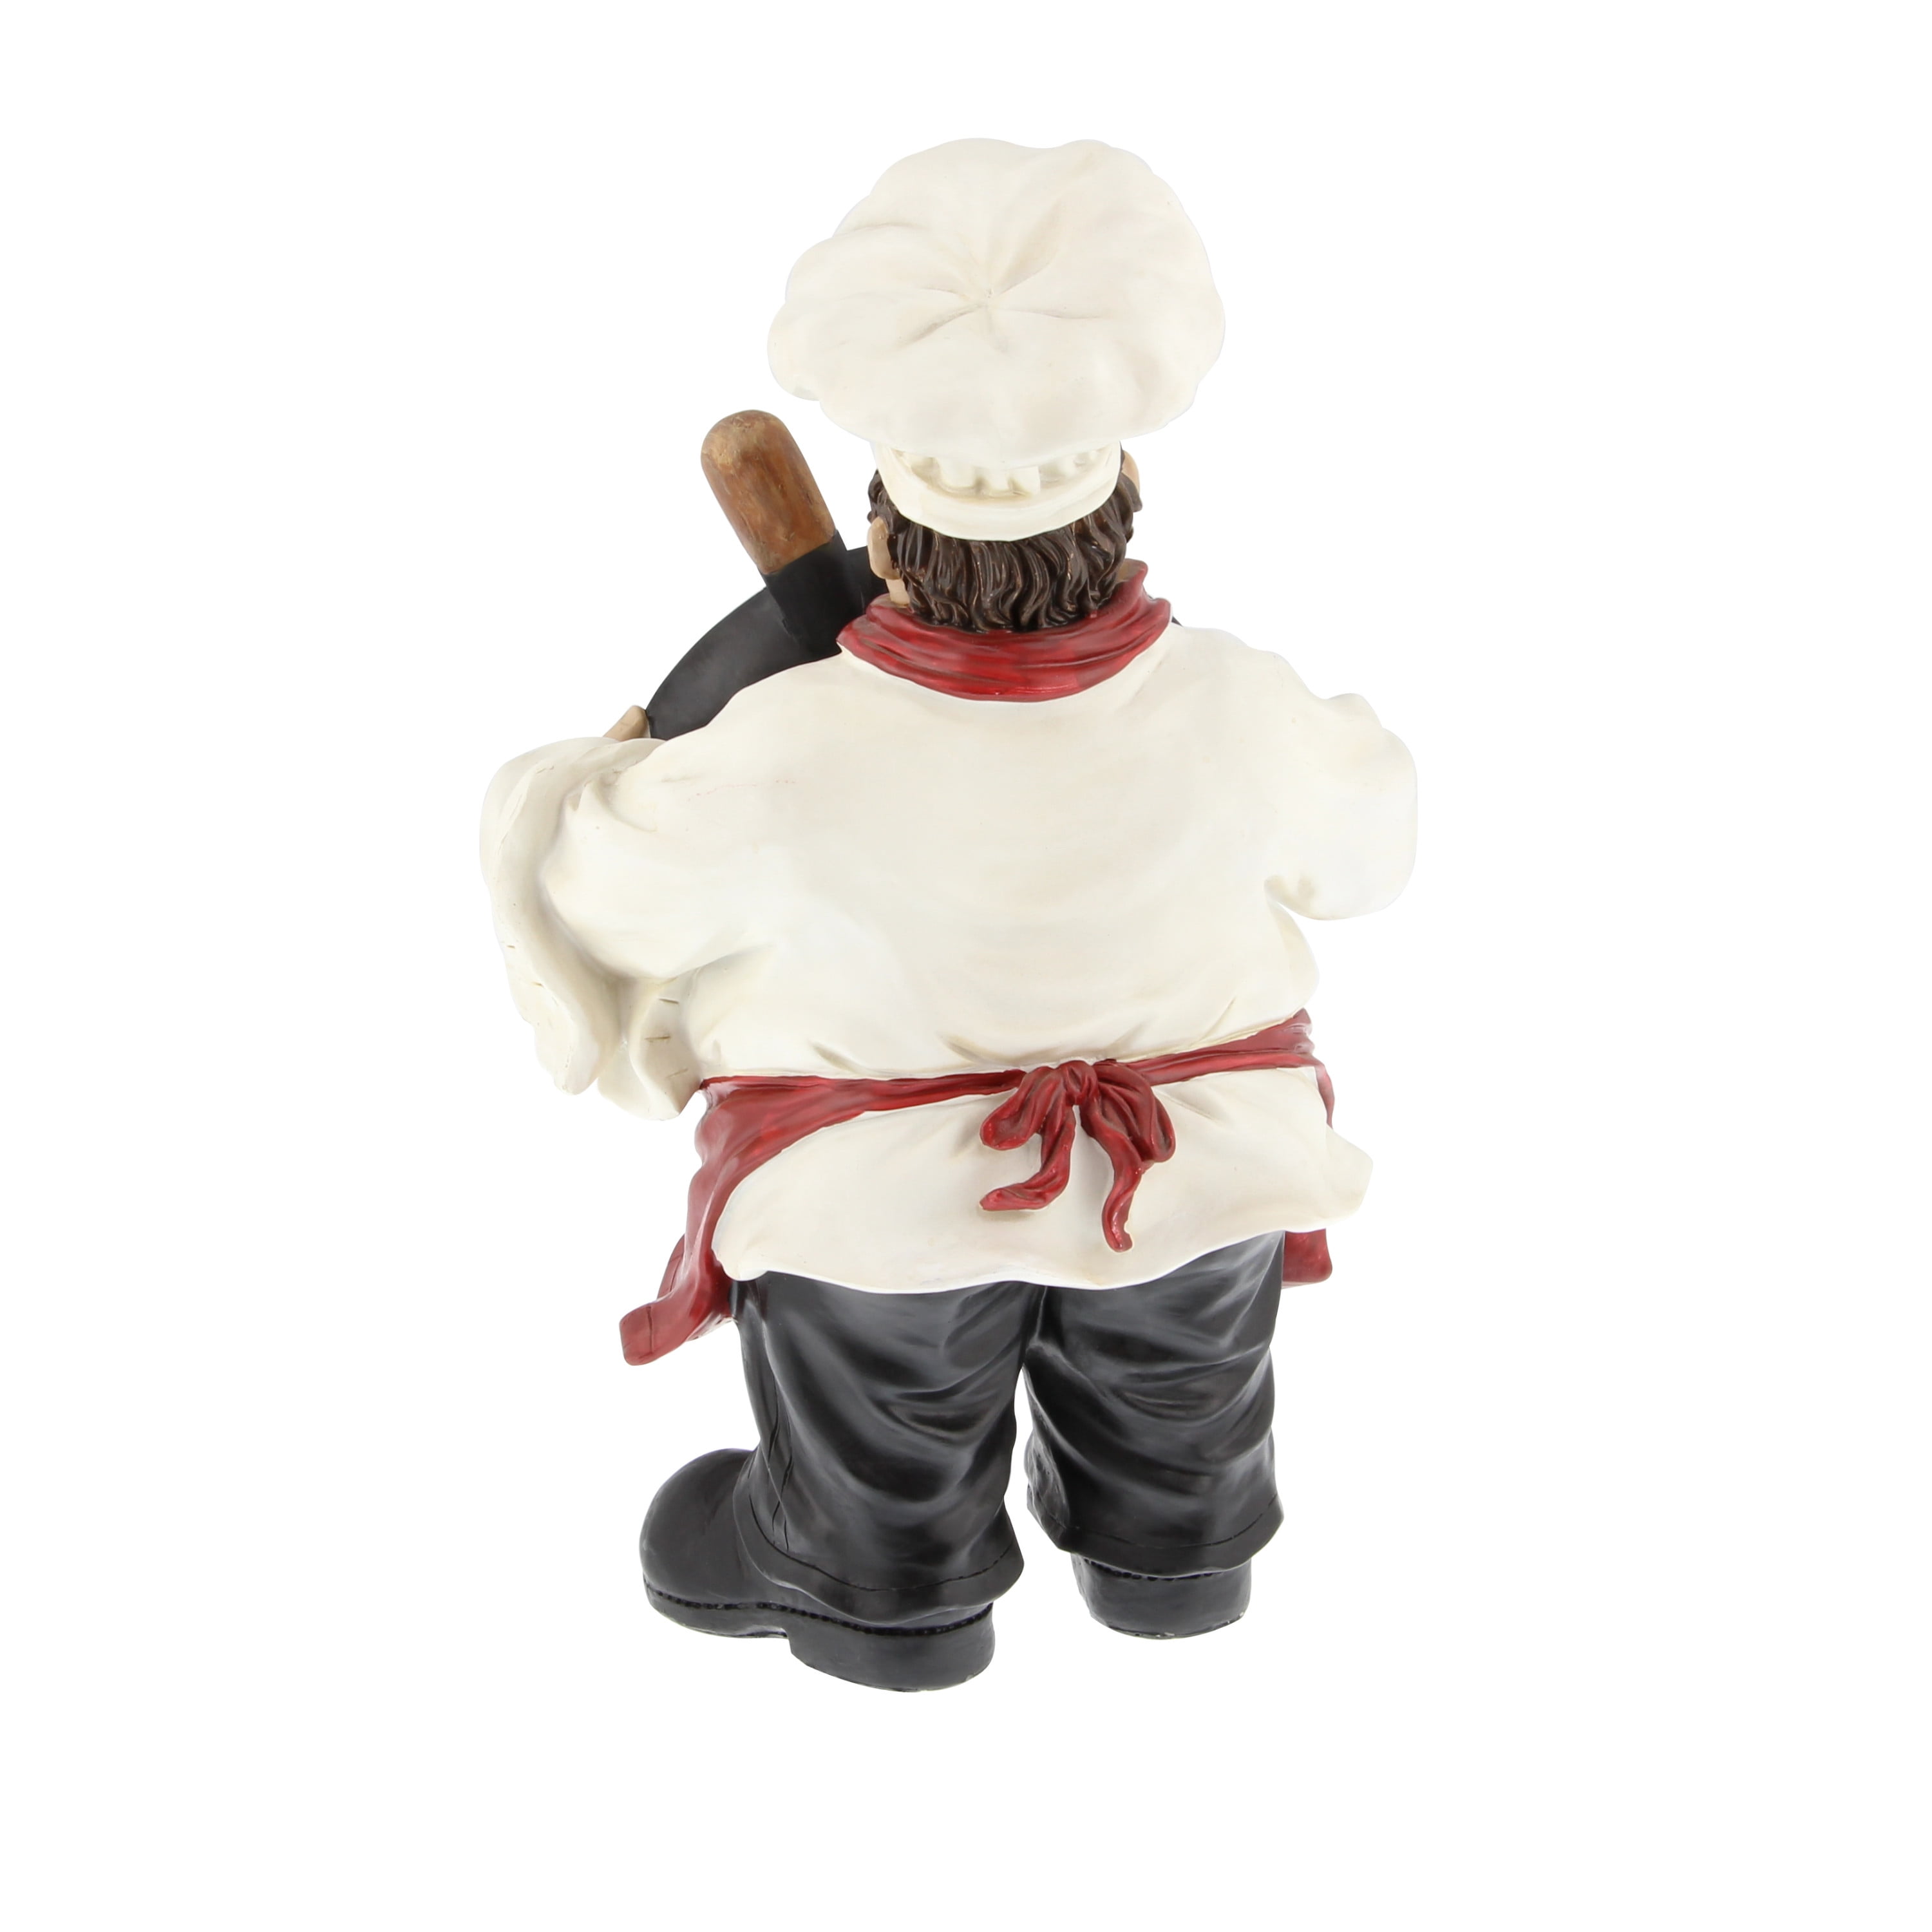 22 x 14 Brown Wood Chef Sculpture with Calendar Markers, by DecMode 